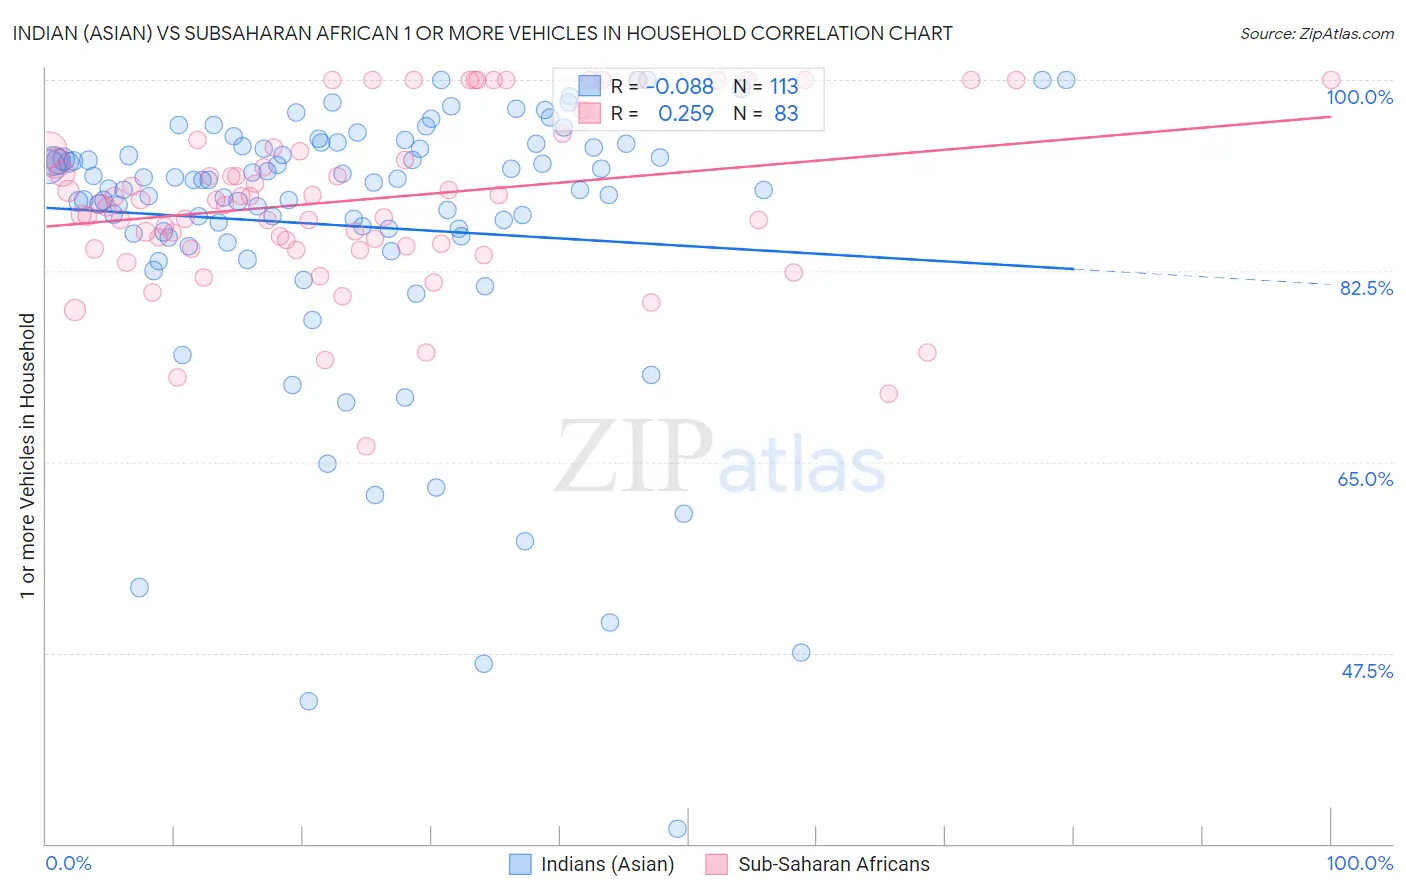 Indian (Asian) vs Subsaharan African 1 or more Vehicles in Household